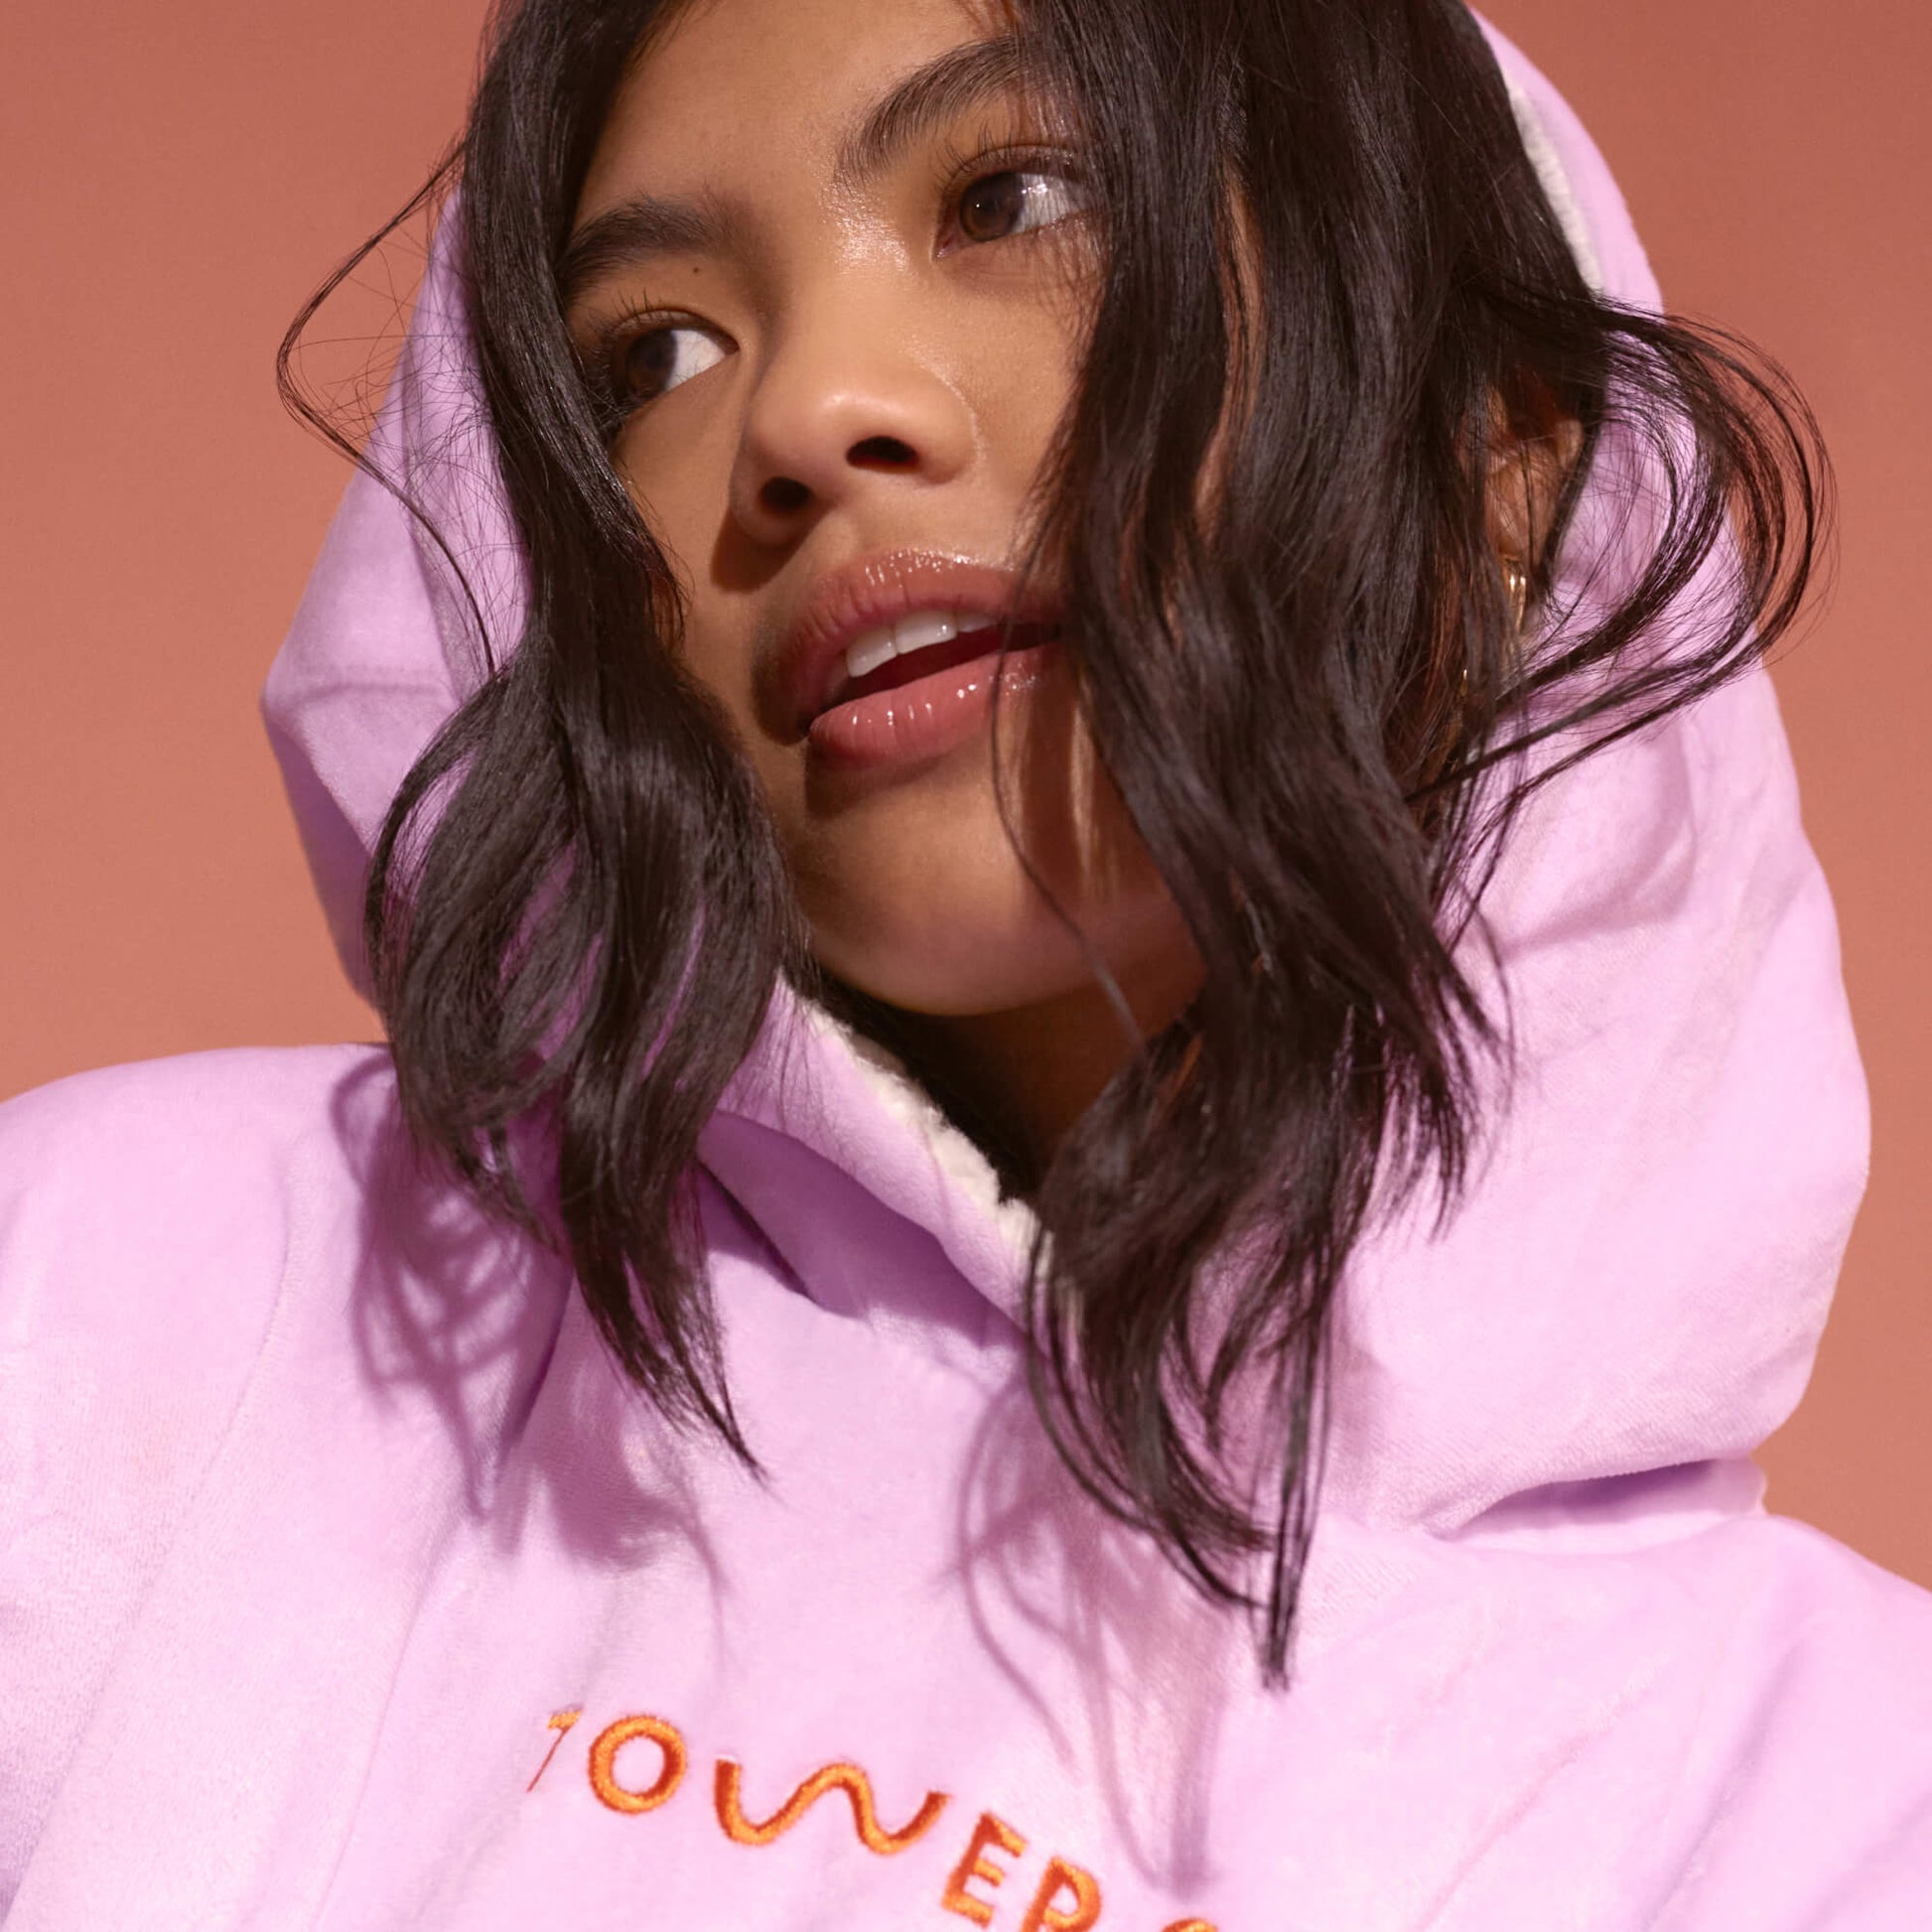 [Shared: A model wearing her Tower 28 Beauty x Comfy® Originals comfy, which is in a light purple with an orange logo placed across the chest.